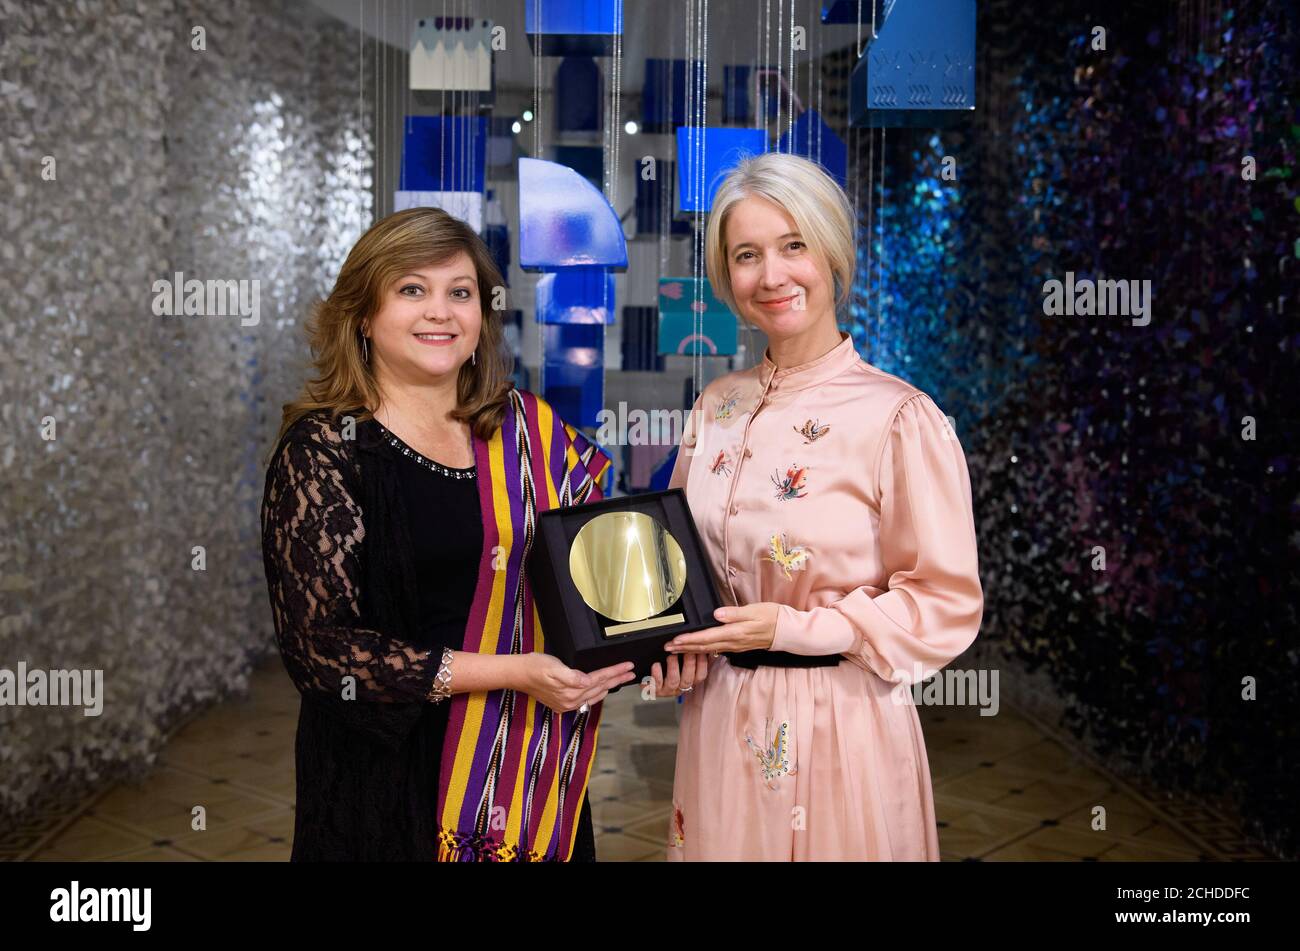 EDITORIAL USE ONLY Cecilia Santamarina de orive from Guatemala the winner of the London Design Biennale 2018 Public Medal, and Justine Simons (right), Deputy Mayor for Culture and the Creative Industries, at Somerset House, London.  Stock Photo